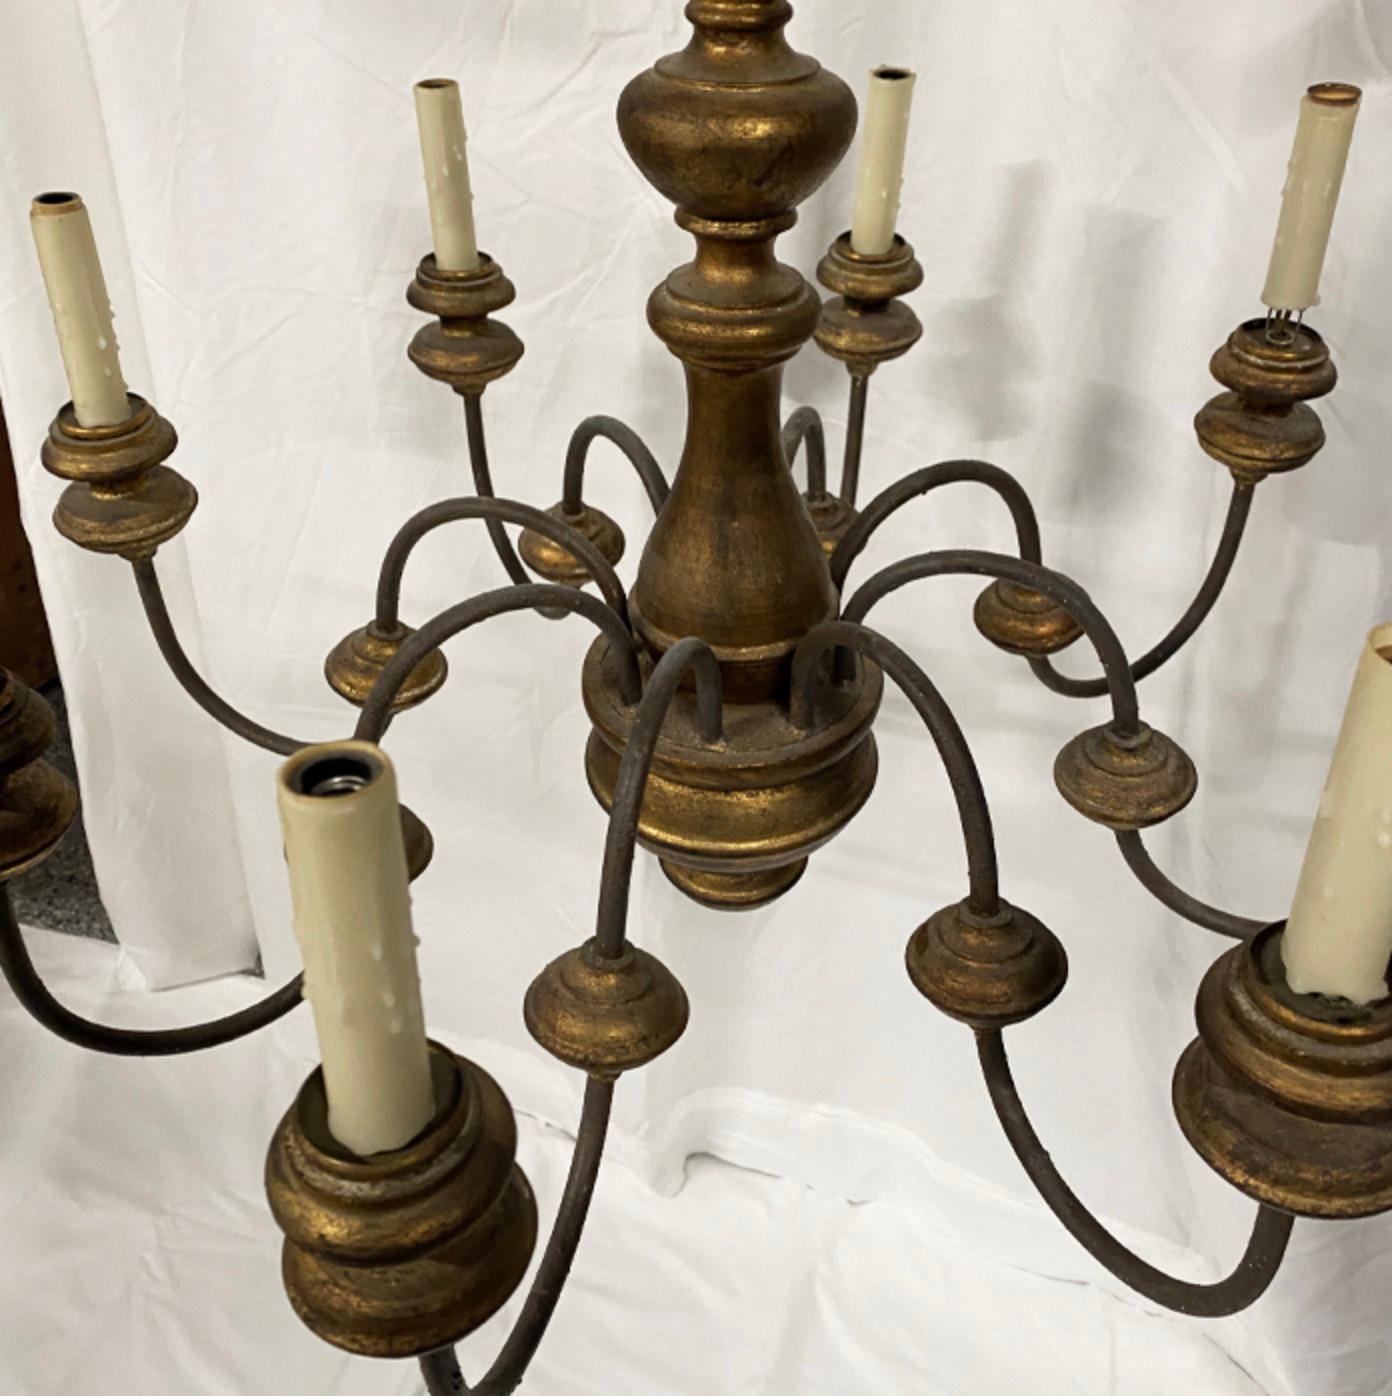 Rustic Antique Painted Wood and Gilt Chandelier

Eight arm painted wood chandelier.

Dimensions: 23.5″h not including chain, 27.5″ overall width